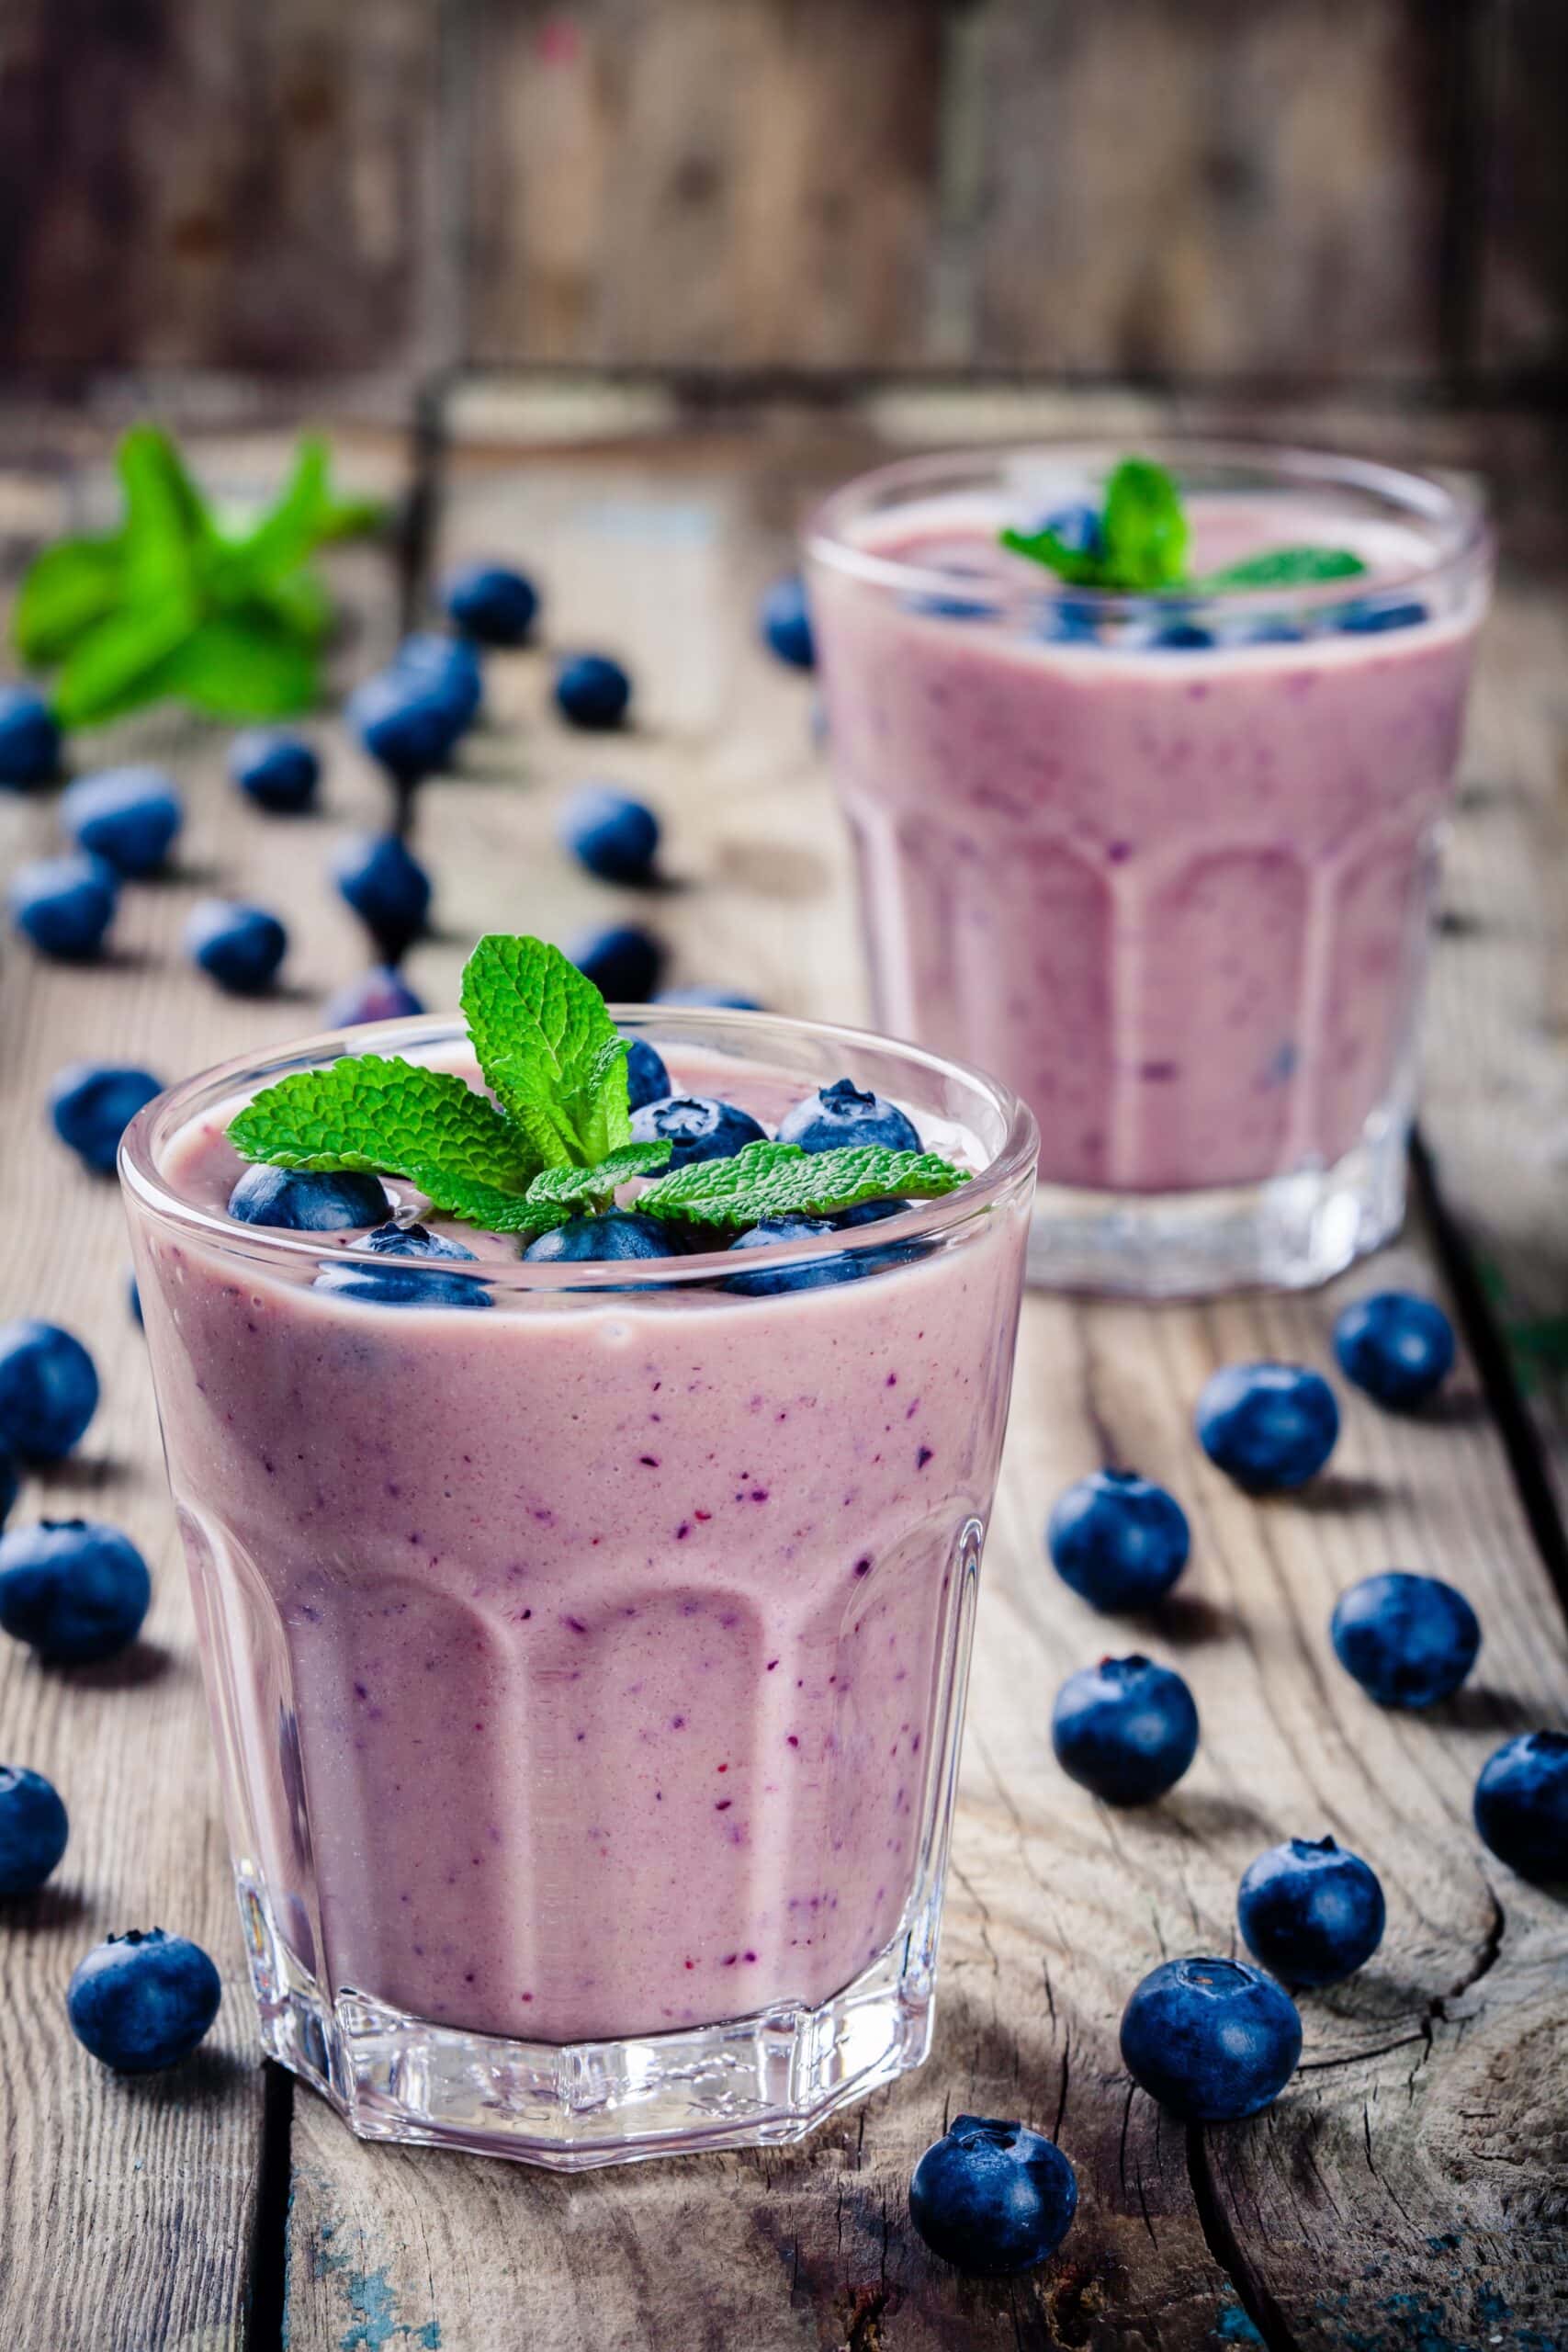 Blueberry smoothie | Snacks For AIP Diet